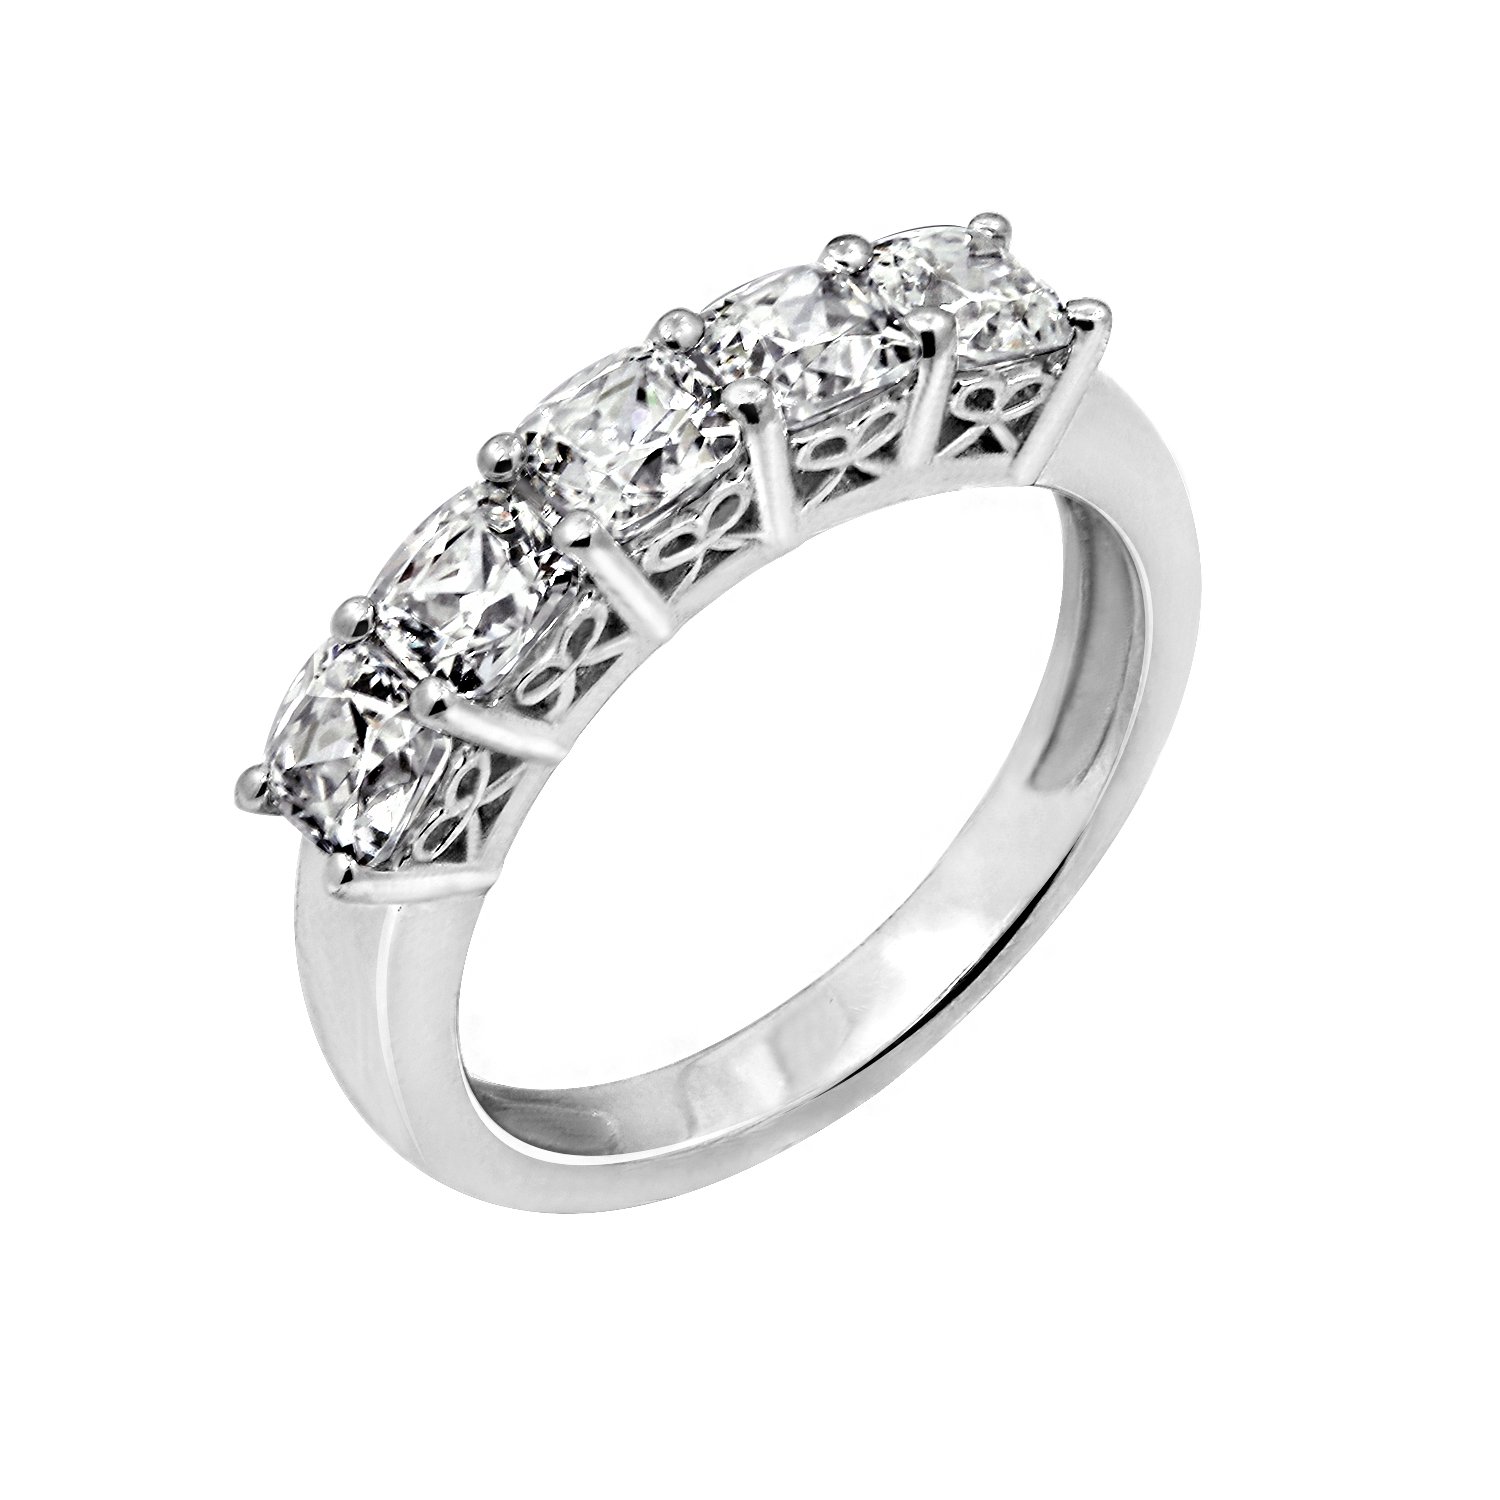 Amazon Collection Platinum or Gold Plated Sterling Silver Fancy Cut 5-Stone Ring made with Infinite Elements Zirconia